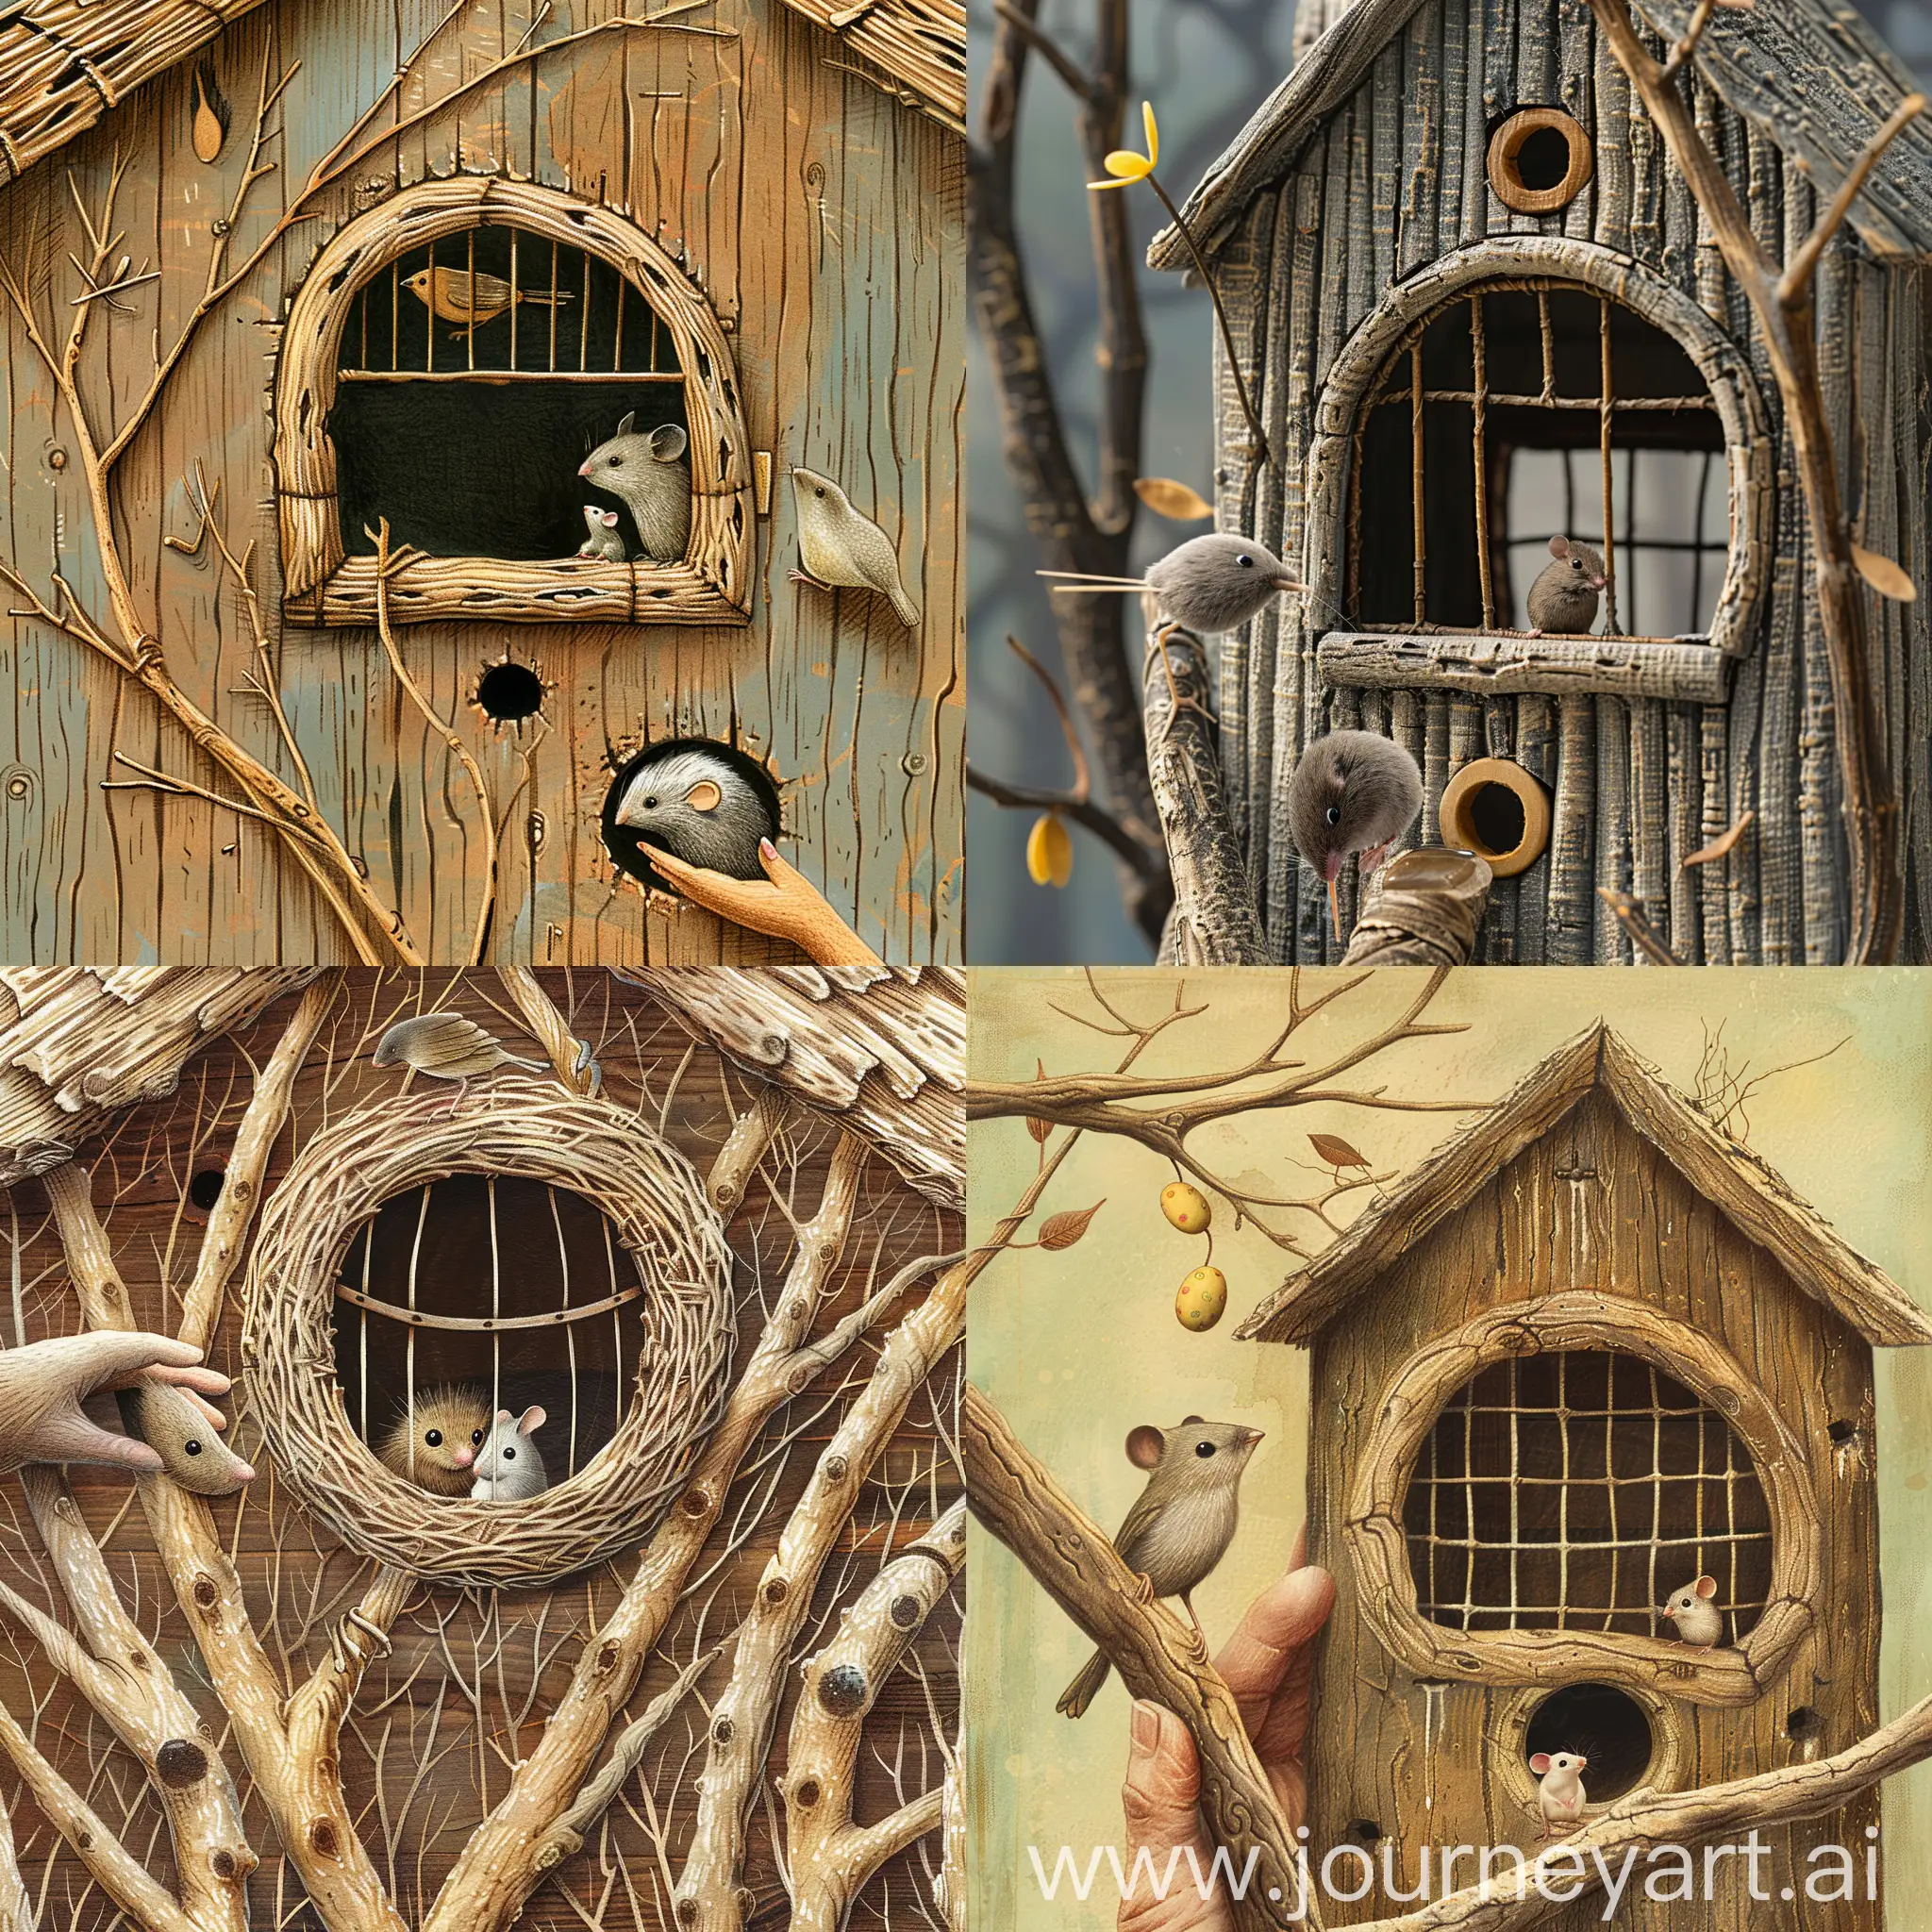 Whimsical-Birdcage-with-Twig-Hand-and-Playful-Creatures